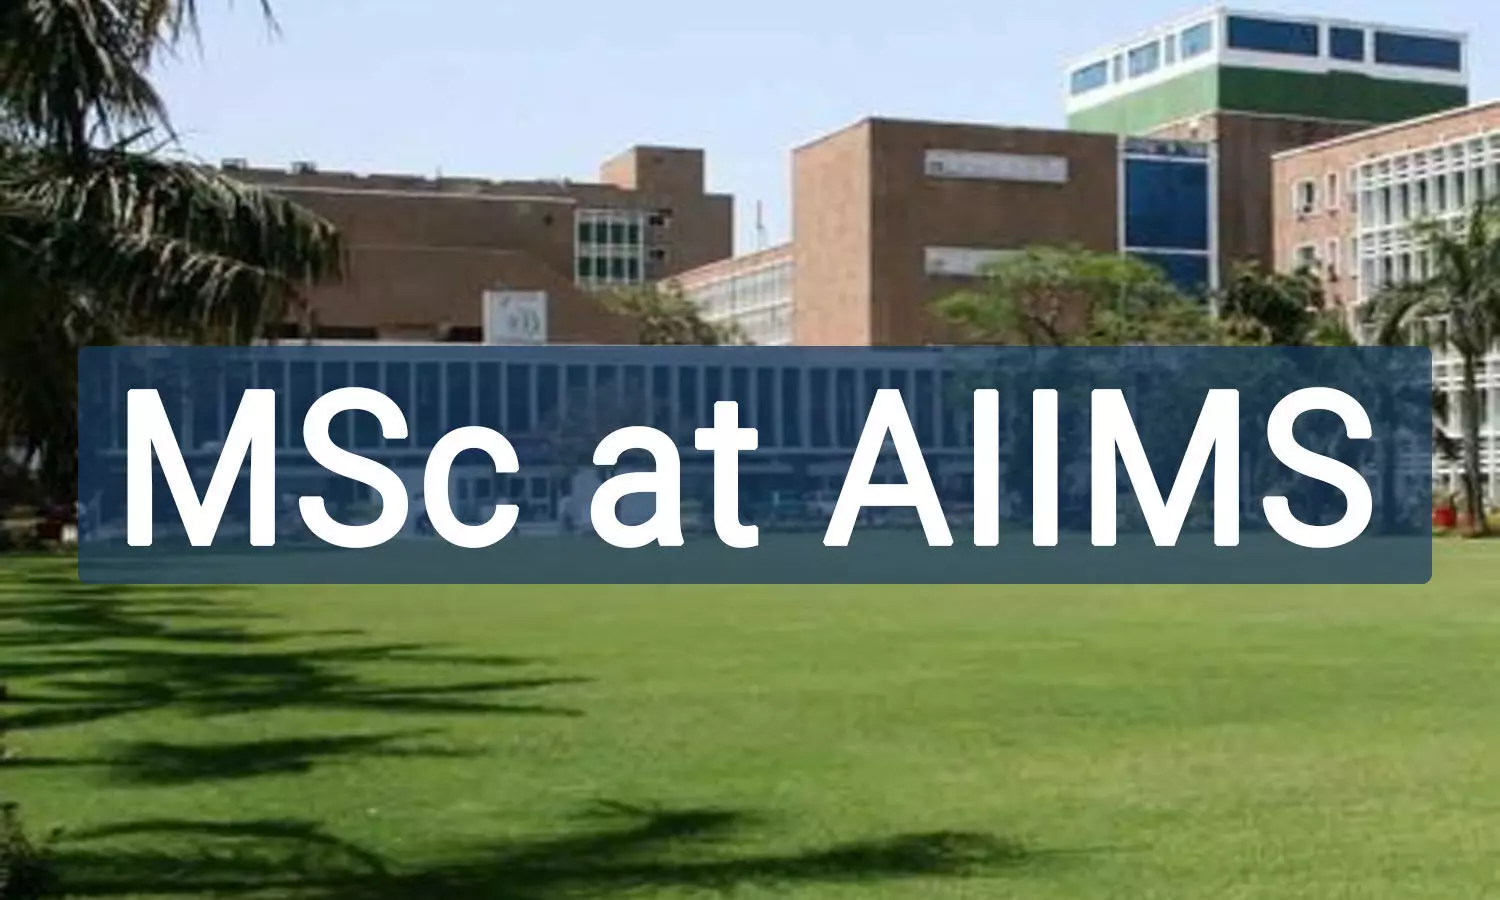 AIIMS informs on City Choice Exercise Option of Registration For MSc Courses 2021 Session